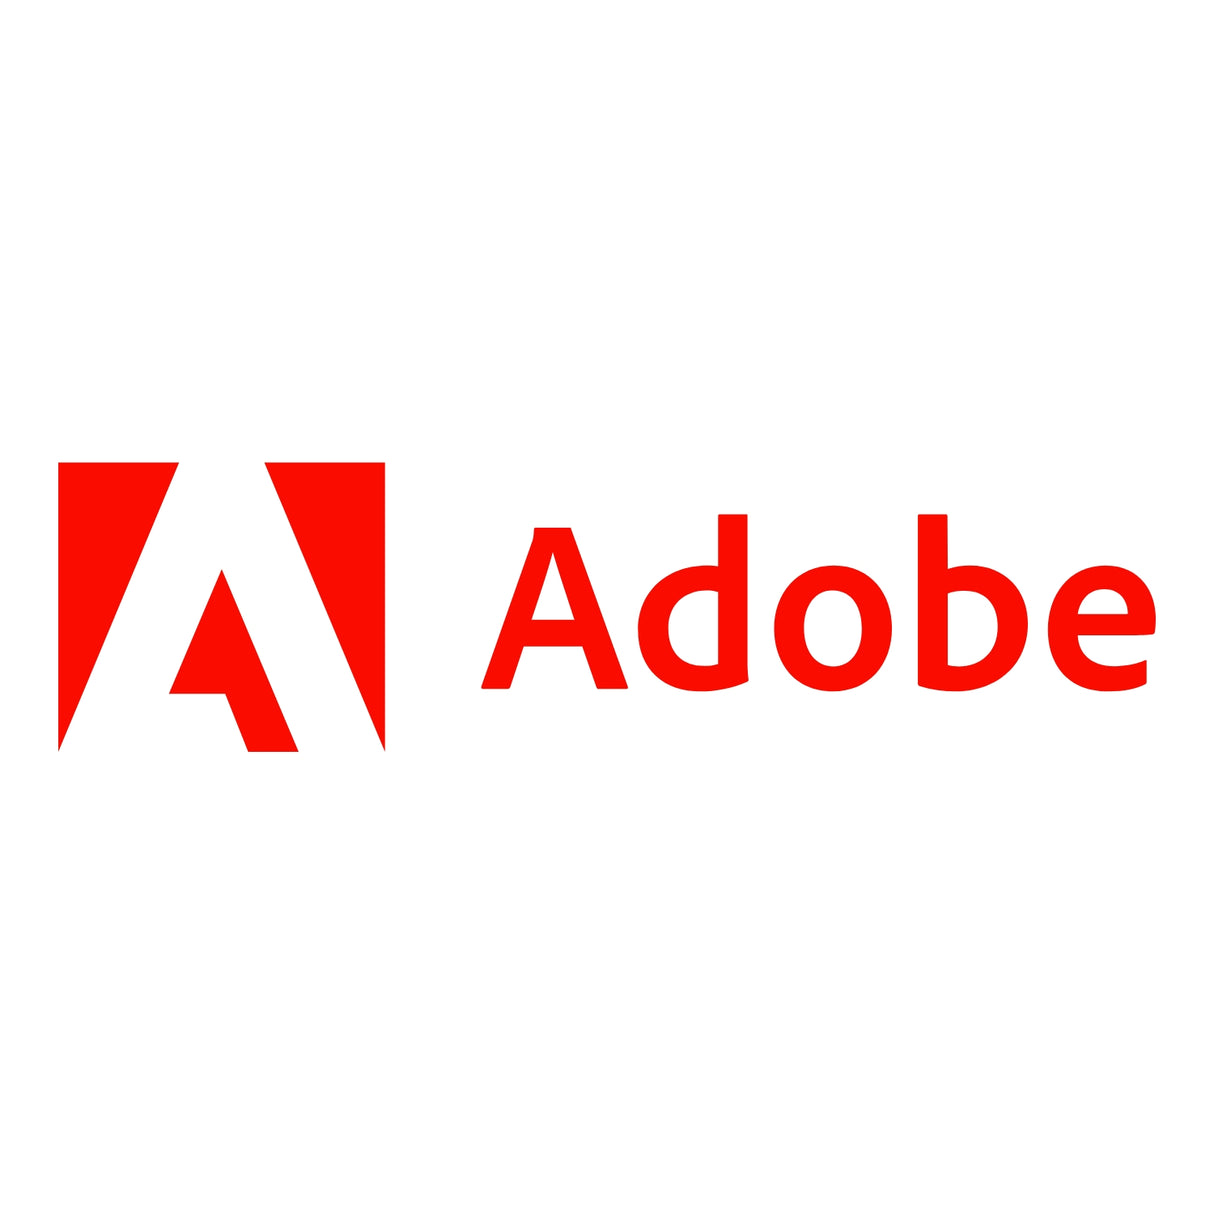 Adobe - Creative, marketing and document management solution software